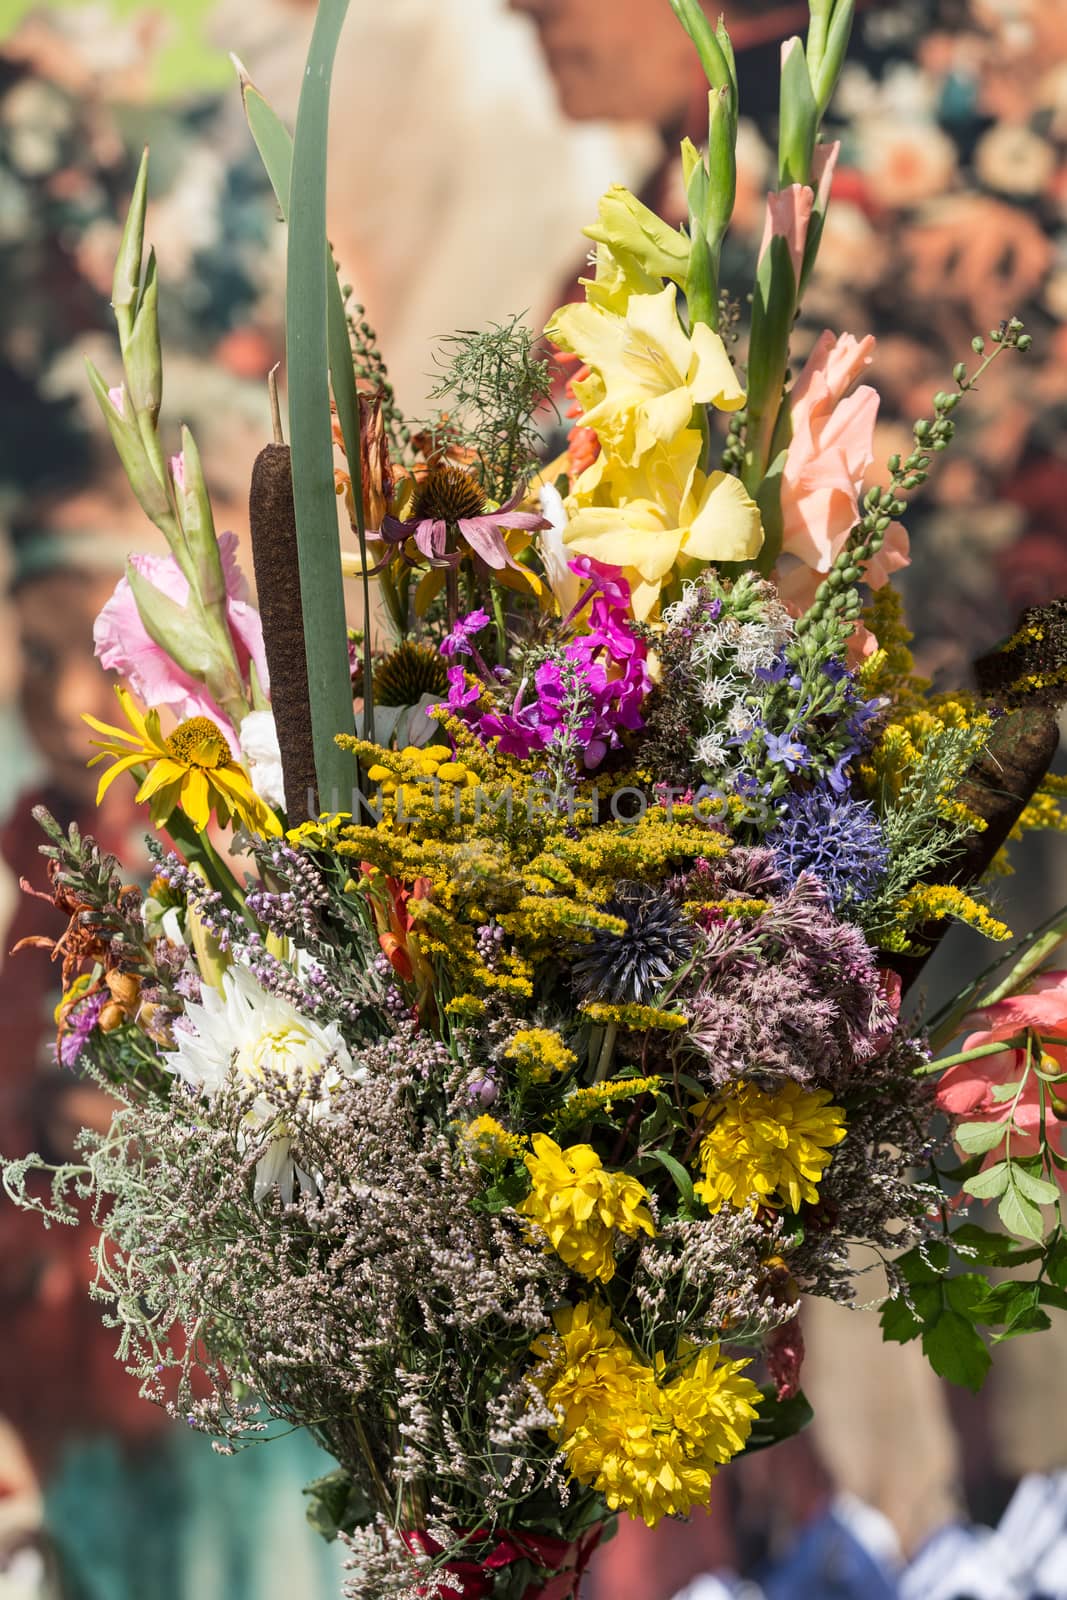 beautiful bouquets of flowers and herbs  by wjarek